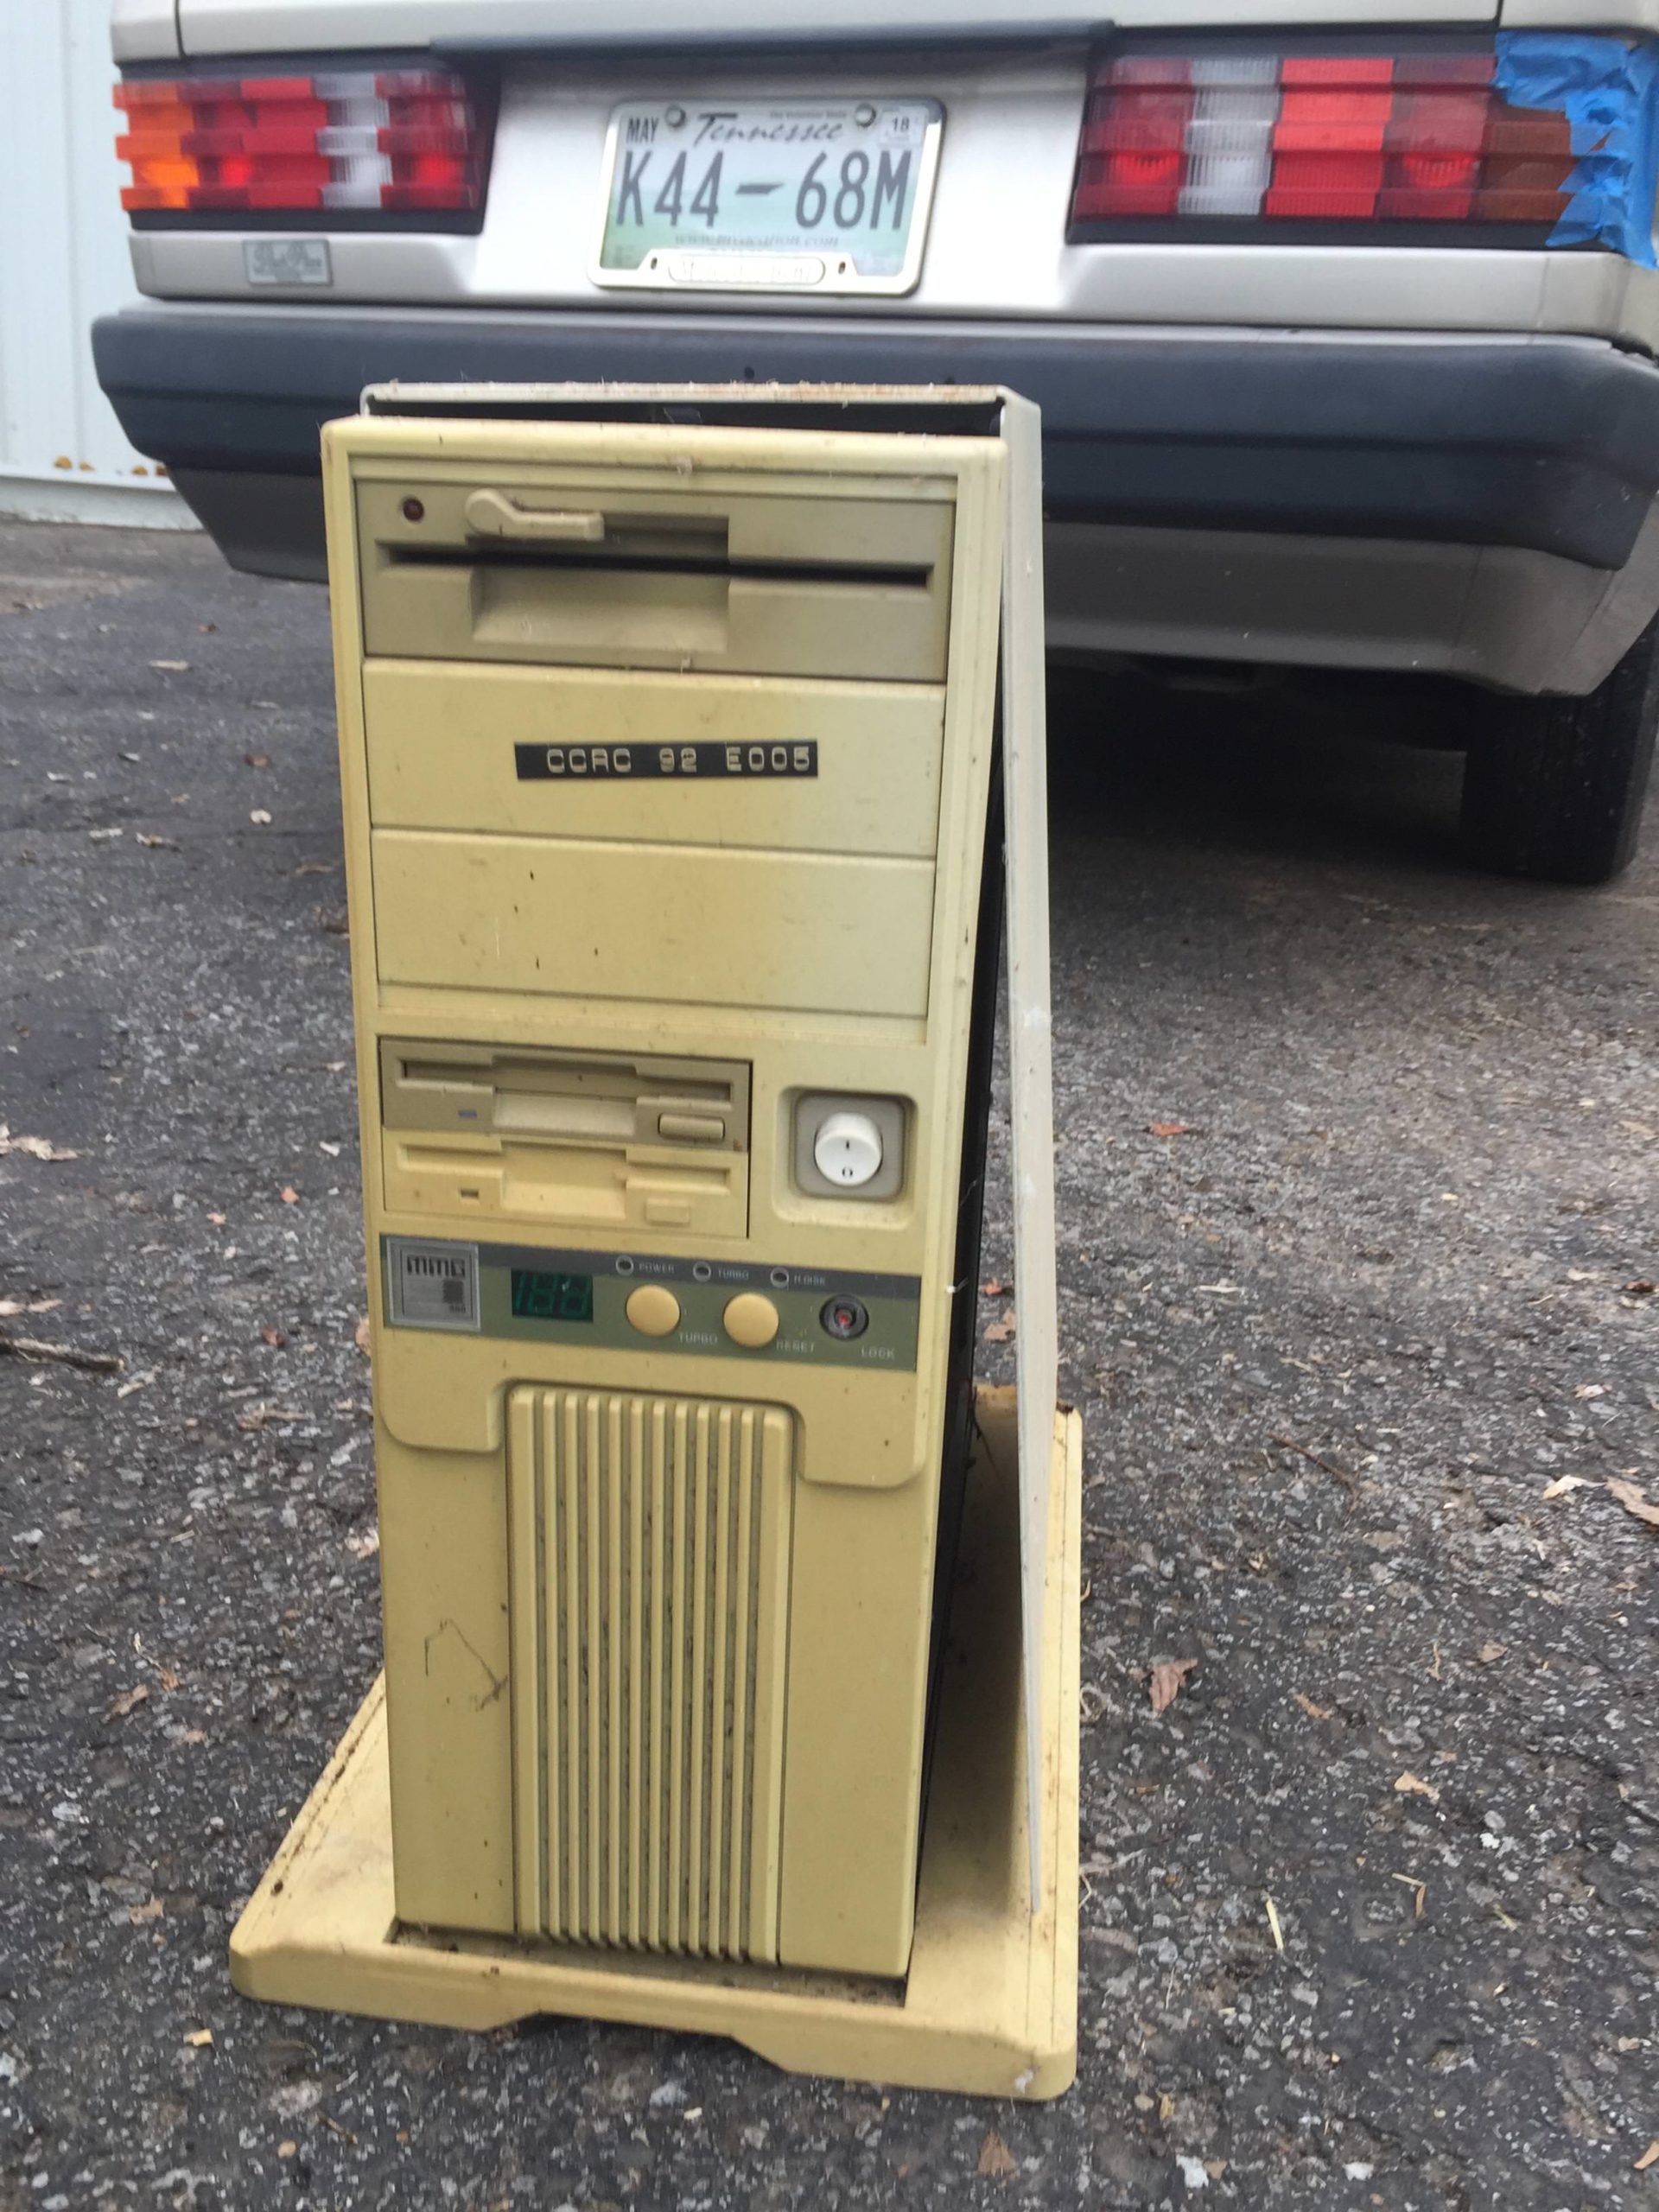 A Modern Gaming PC Inside An Old 386 Case